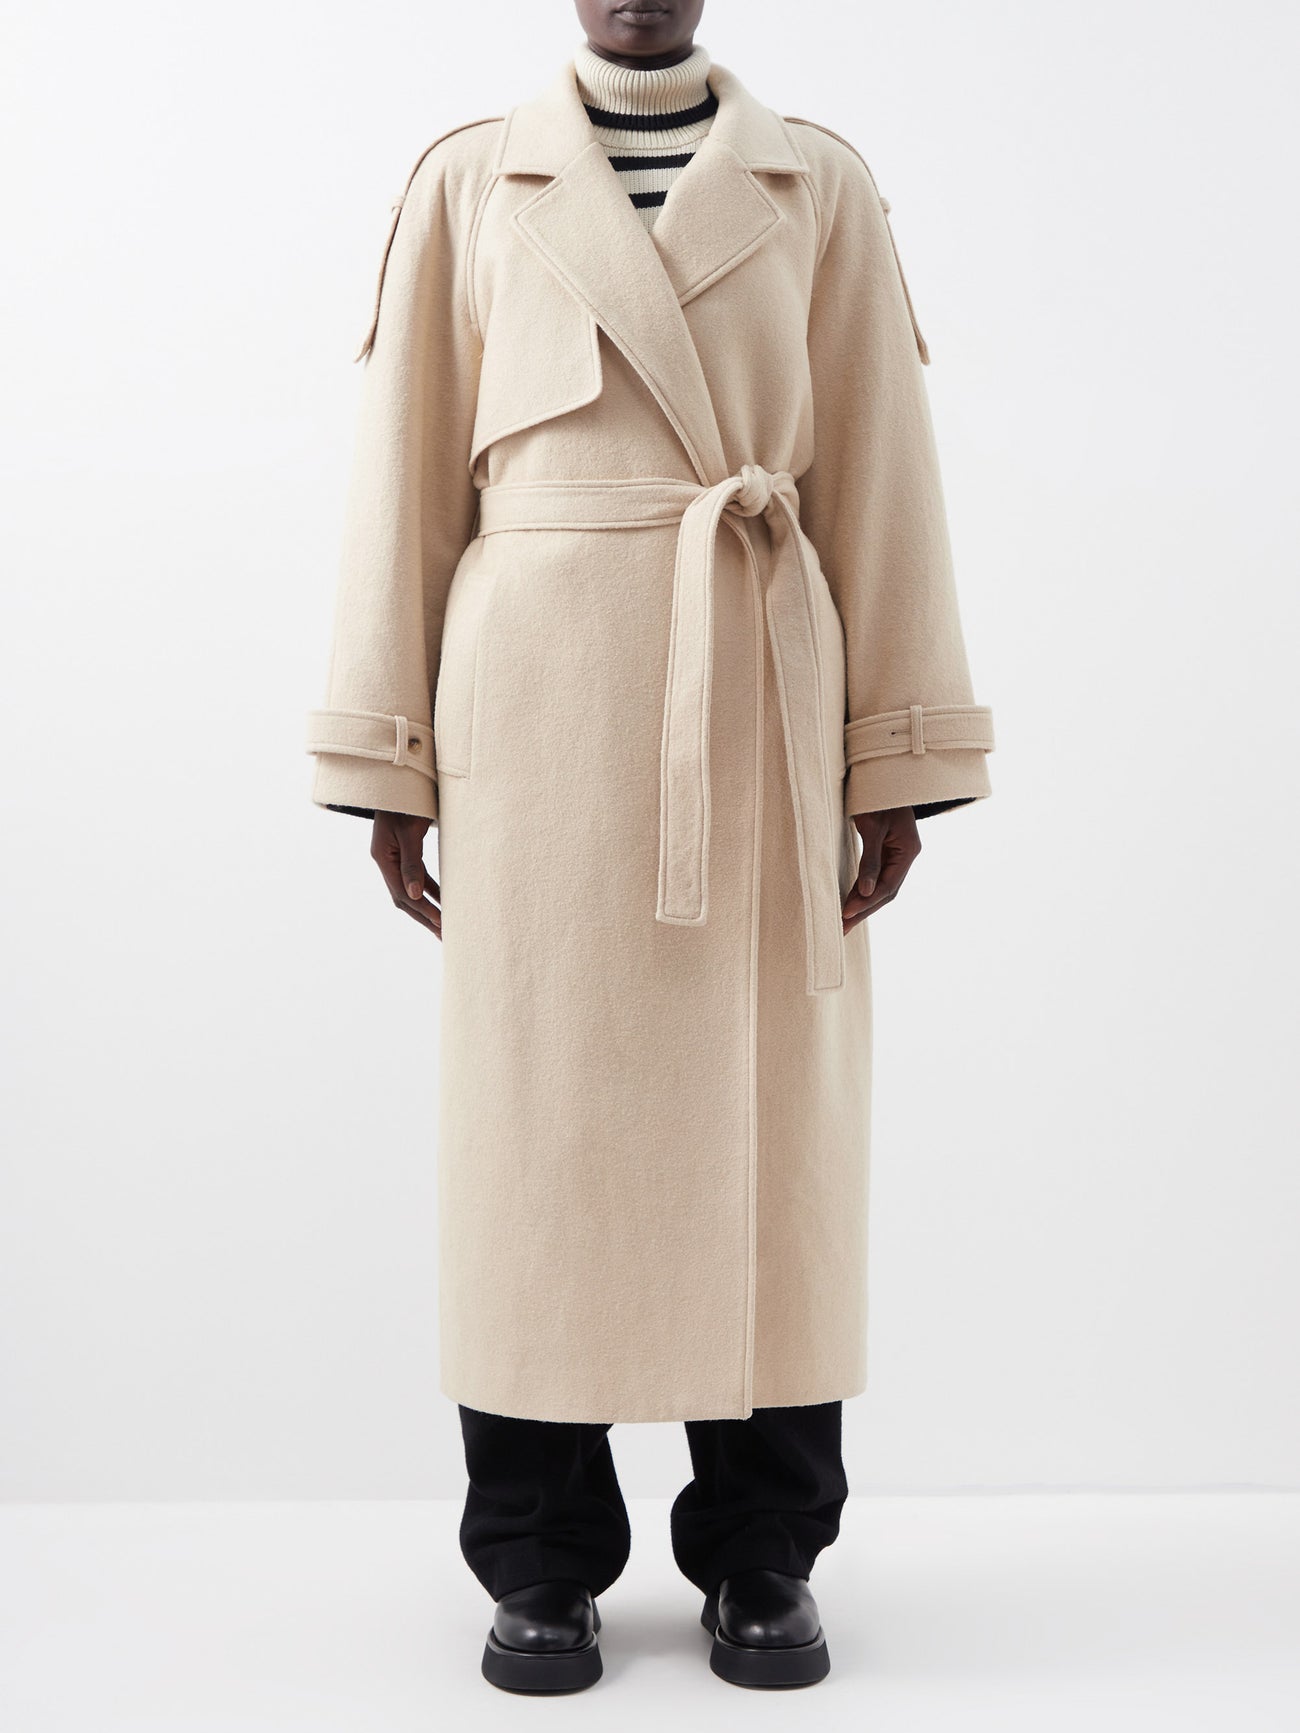 The Frankie Shop Suzanne Belted Wool-Blend Trench Coat